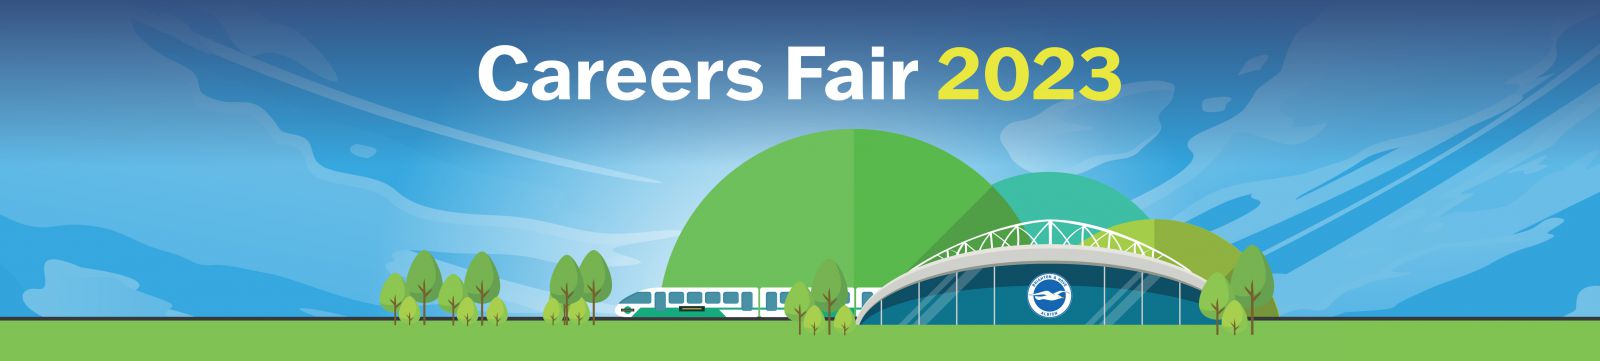 Logo for Careers Fair 2023. It is an illustration featuring grass, trees and sky, the American Express Stadium and a train.